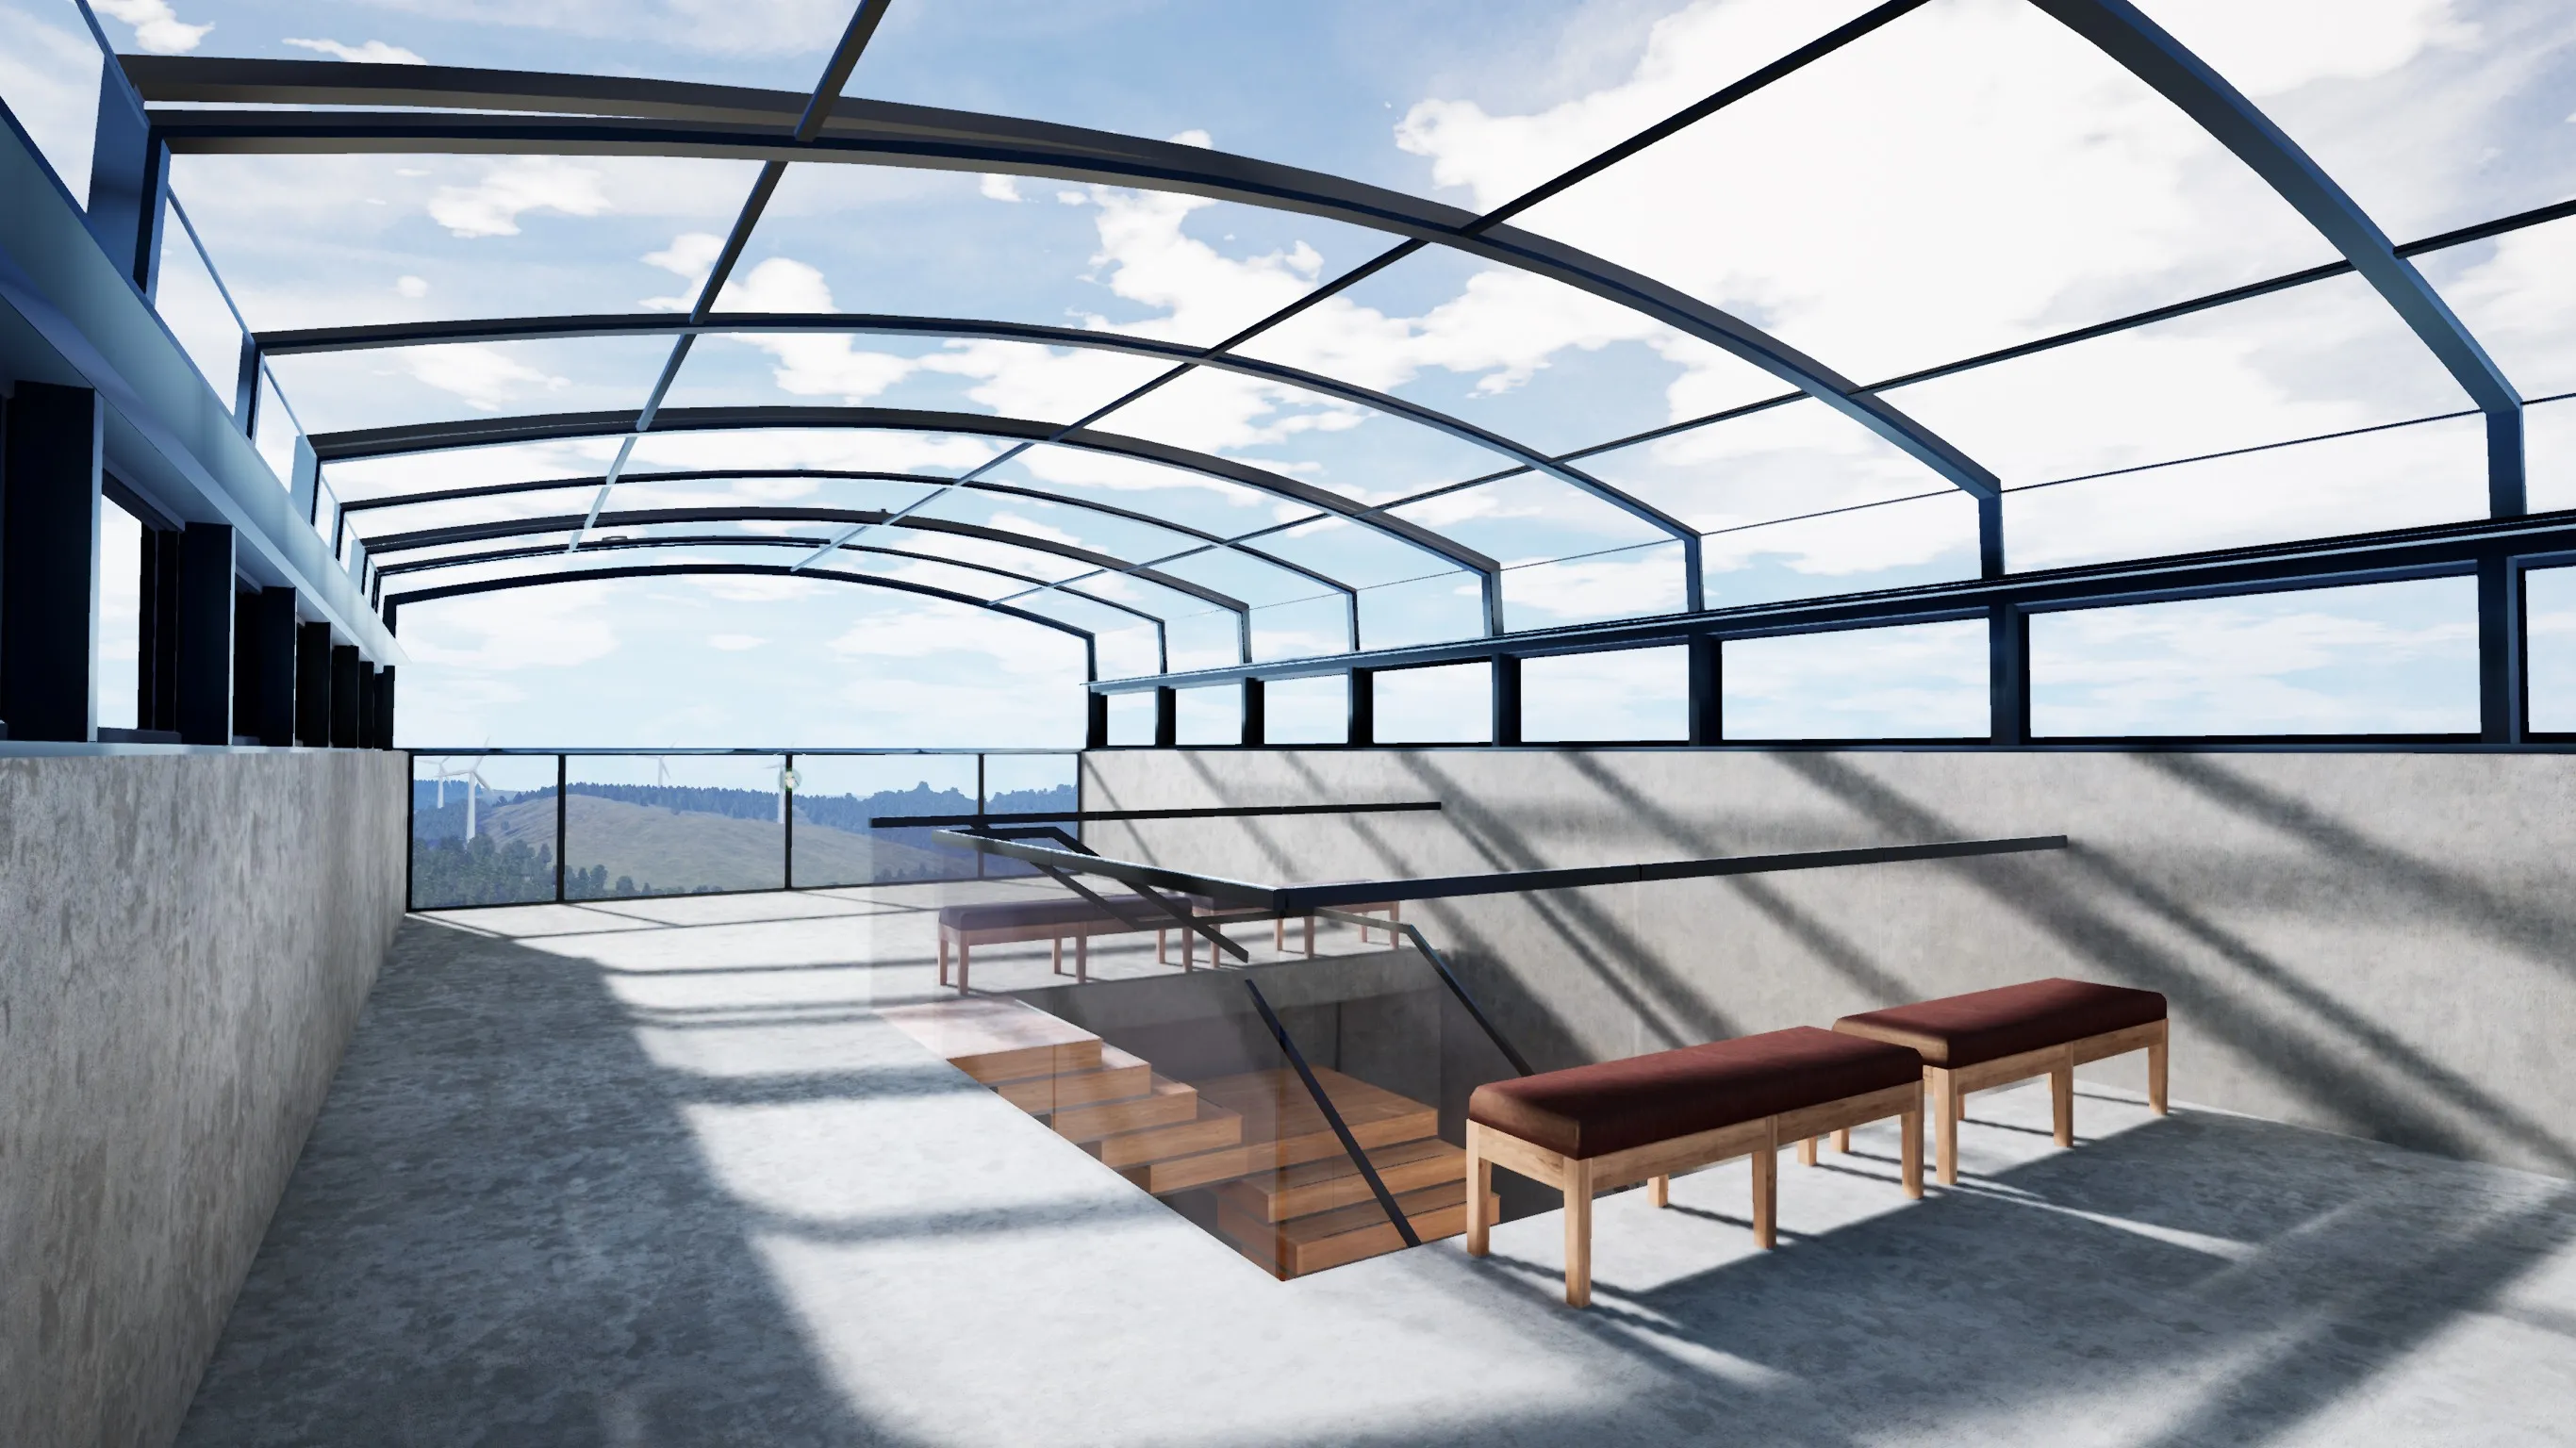 A space with an open view at the top of the 75 meter tall Buzludzha tower. The environment features an arched, transparent ceiling with metal frames, allowing ample natural light to flood the interior. Two simple benches with brown wooden seats and black metal legs are placed against a plain wall to the right. The floor is made of polished concrete, casting soft shadows from the overhead structure. To the left, a set of wooden stairs with a black handrail leads down to another level. Through the transparent ceiling and wall panels, a picturesque landscape is visible, showing rolling hills and wind turbines in the distance under a partly cloudy sky. The design is minimalistic, with a spacious and airy feel.